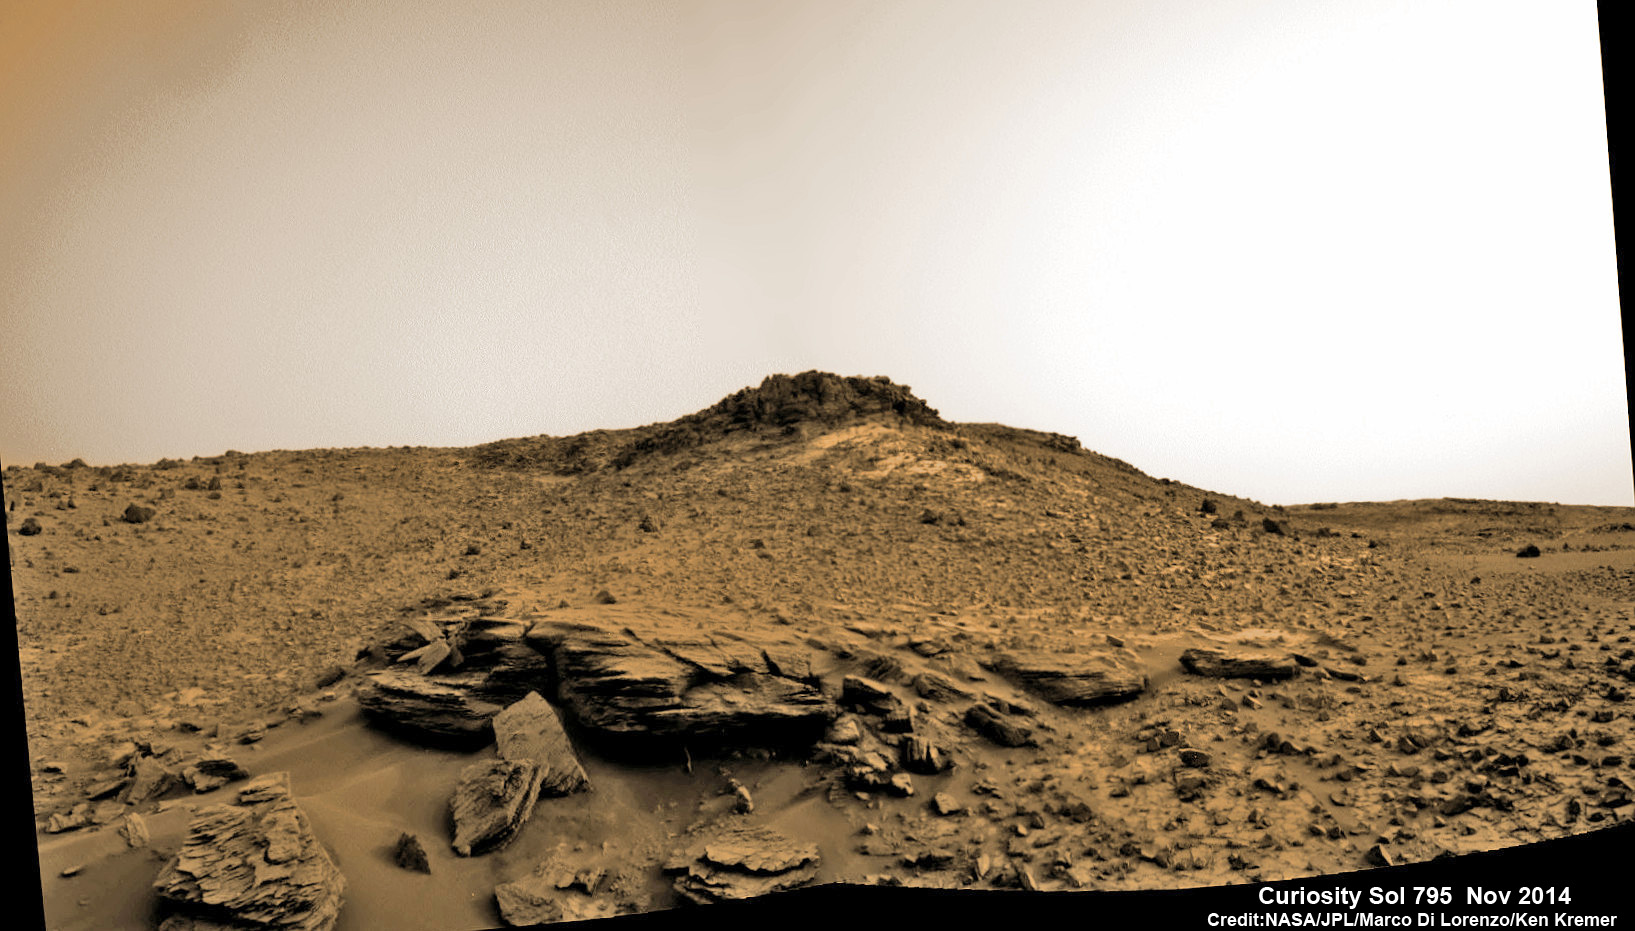 NASA’s Curiosity rover scans around the Pahrump Hills outcrop at the base of Mount Sharp in this photo mosaic stitched from raw images taken on Sol 795, October 31, 2014.    Credit: NASA/JPL/Marco Di Lorenzo/Ken Kremer-kenkremer.com